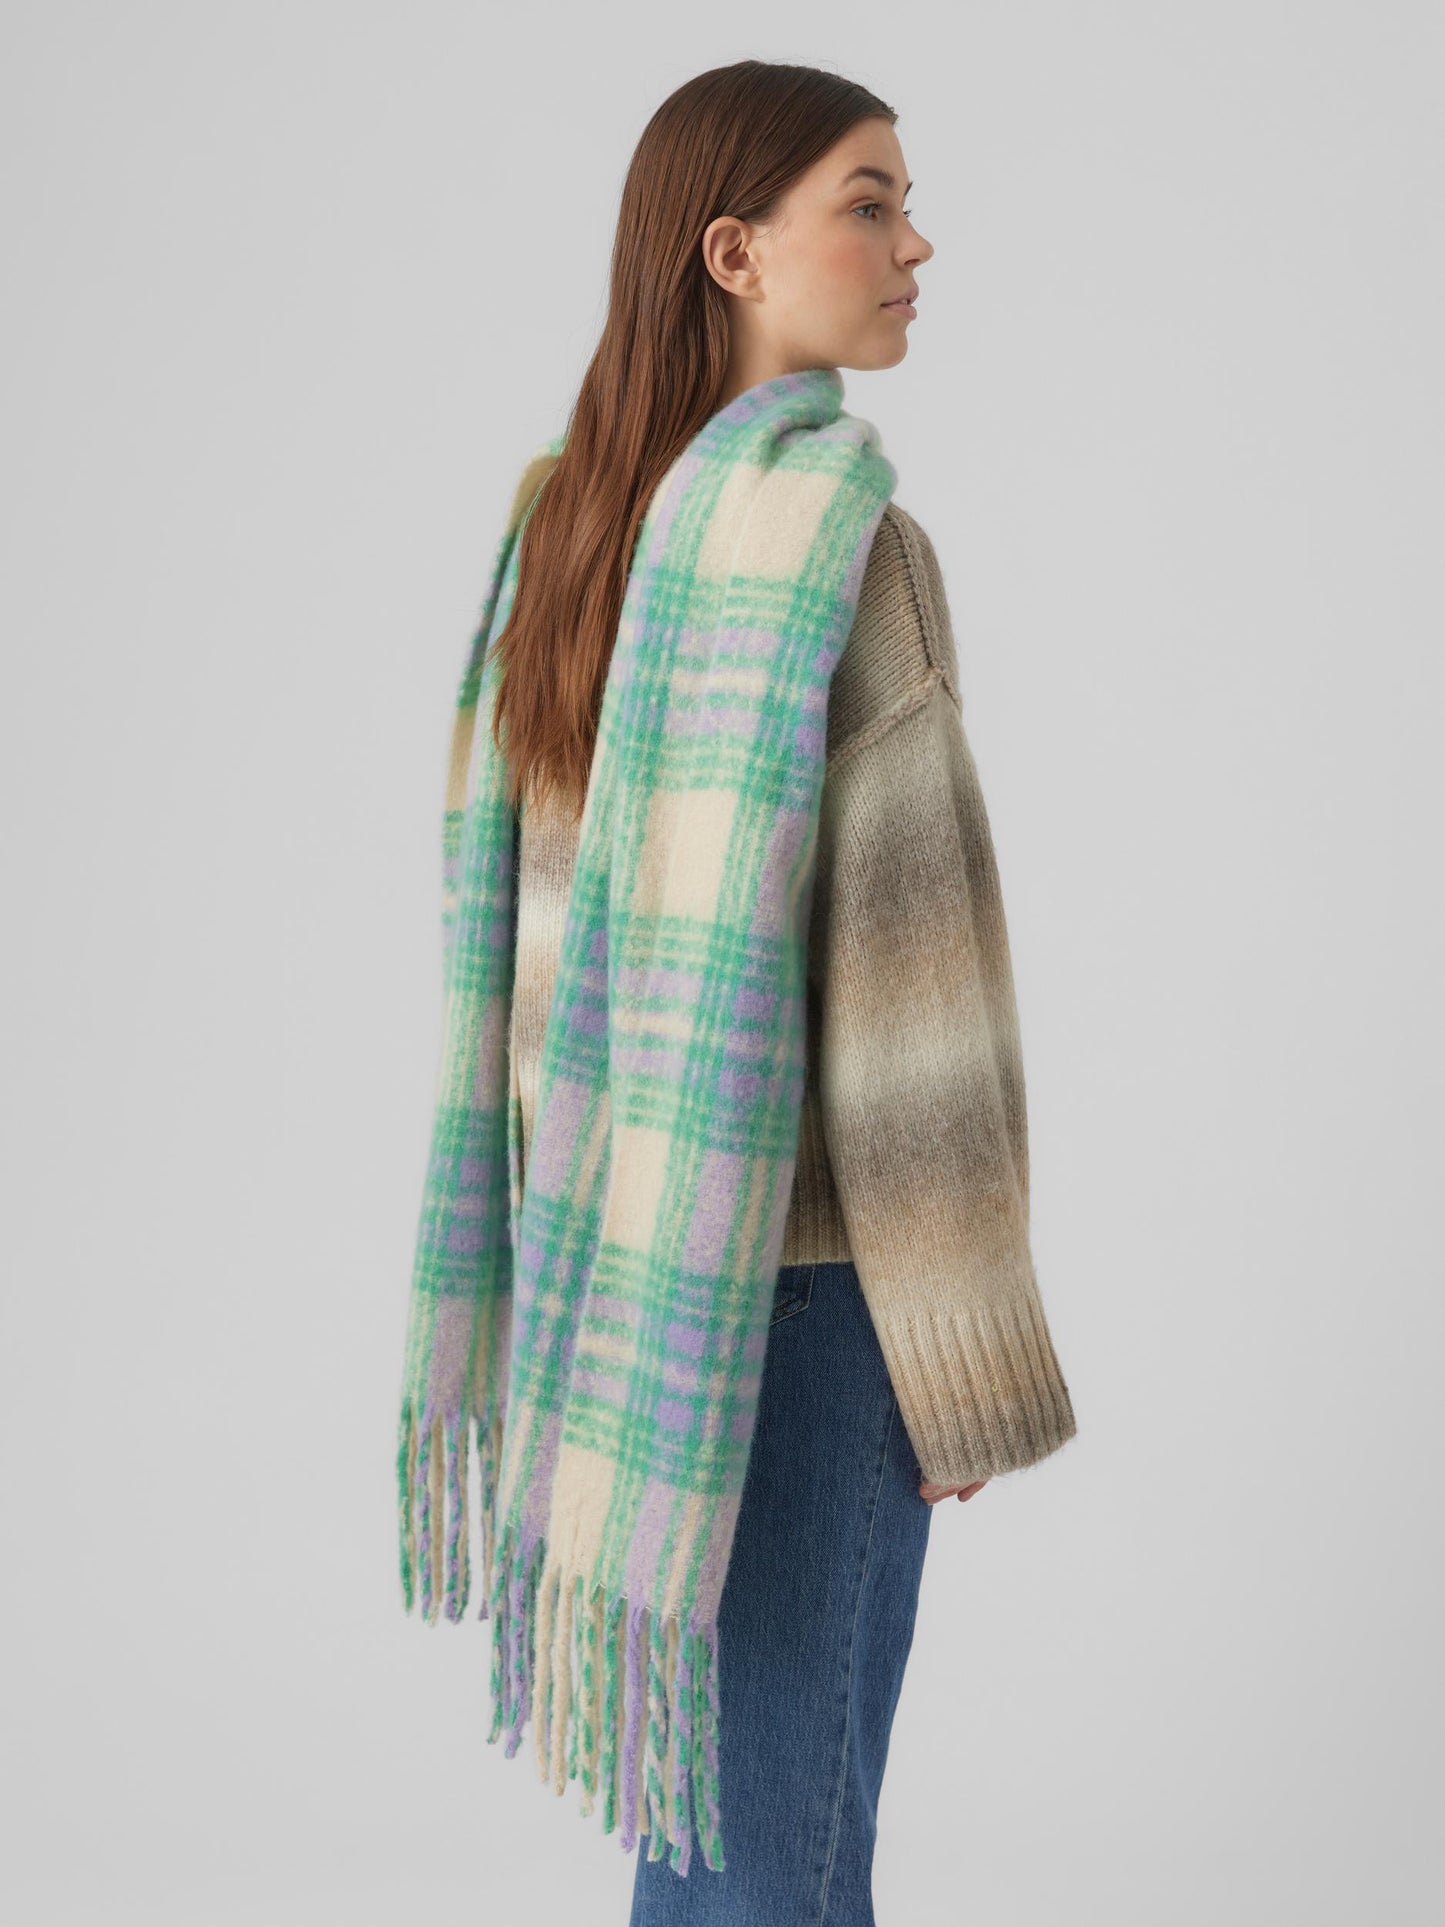 
                  
                    VERO MODA Minty Oversized Heavyweight Brushed Check Scarf with Tassels in Green, Blue & Cream - One Nation Clothing
                  
                